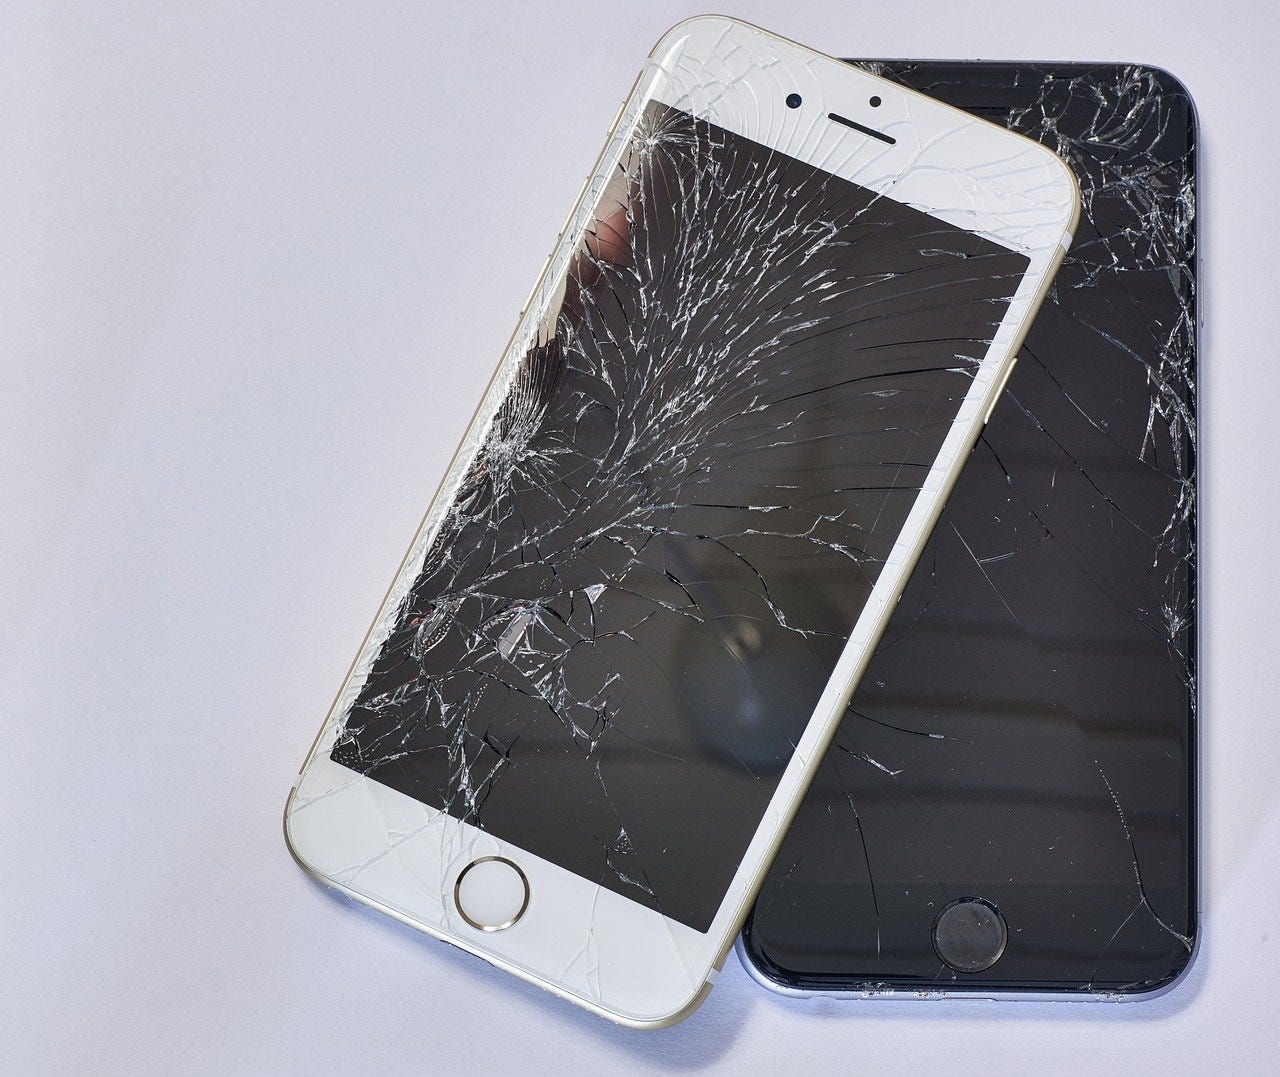 Two iPhones, one black and one white, with cracked screens